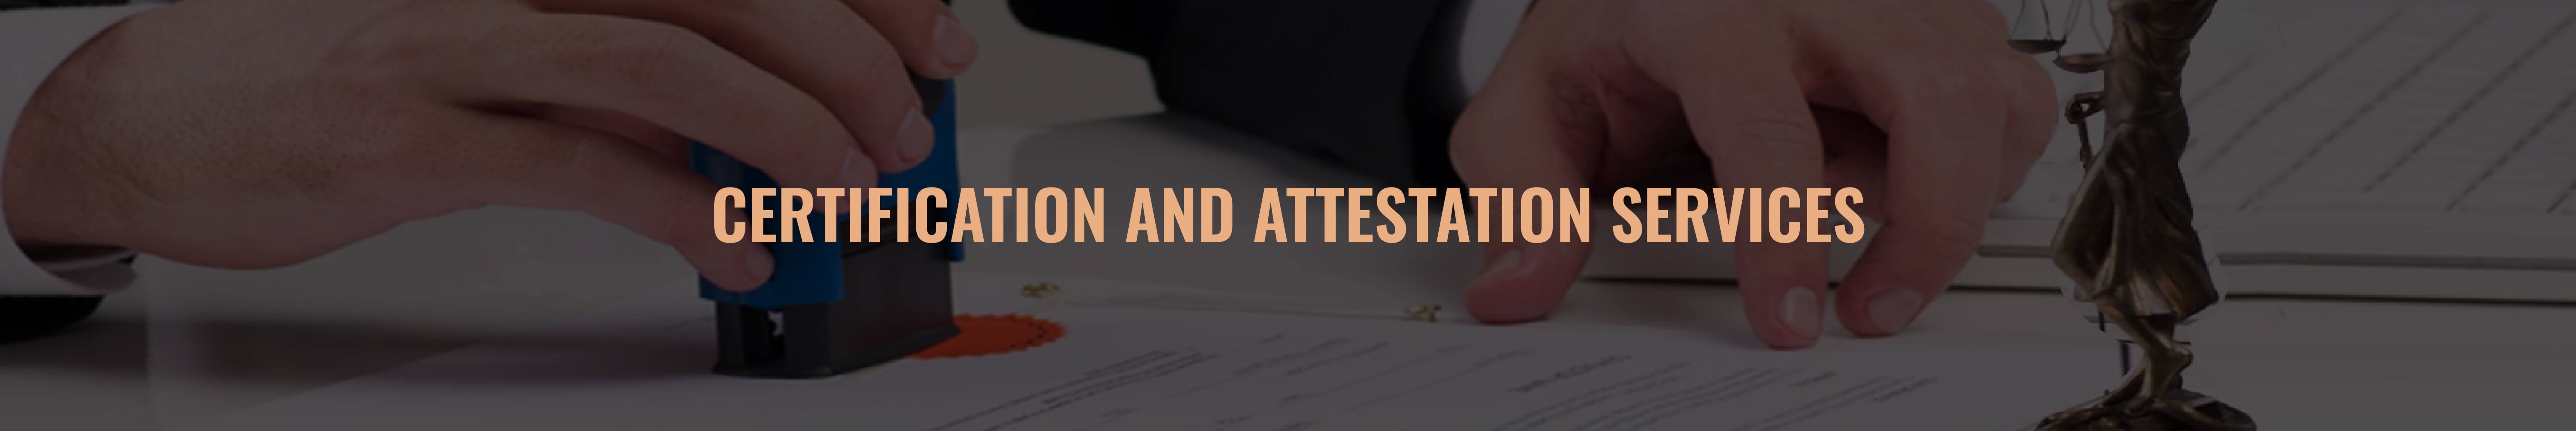 Certification and Attestation Services